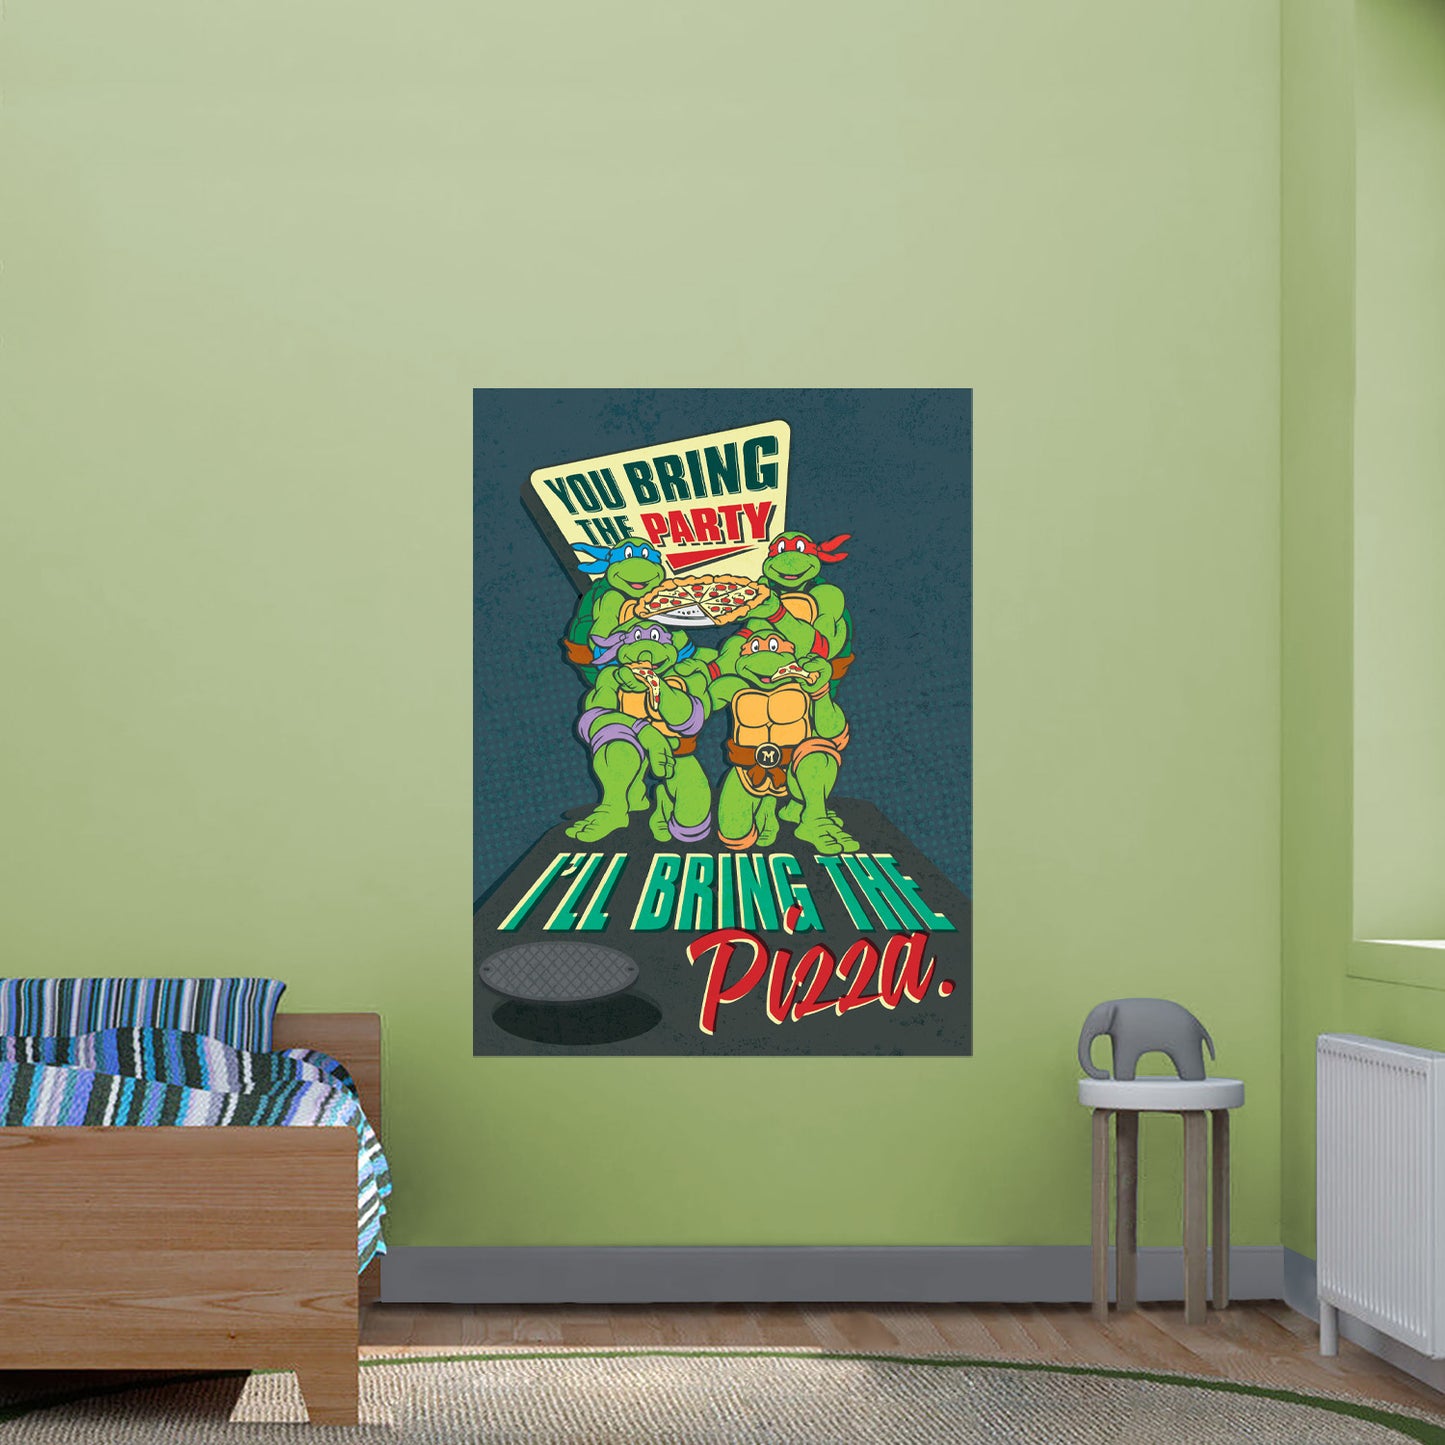 Teenage Mutant Ninja Turtles:  Bring the Party Poster        - Officially Licensed Nickelodeon Removable     Adhesive Decal